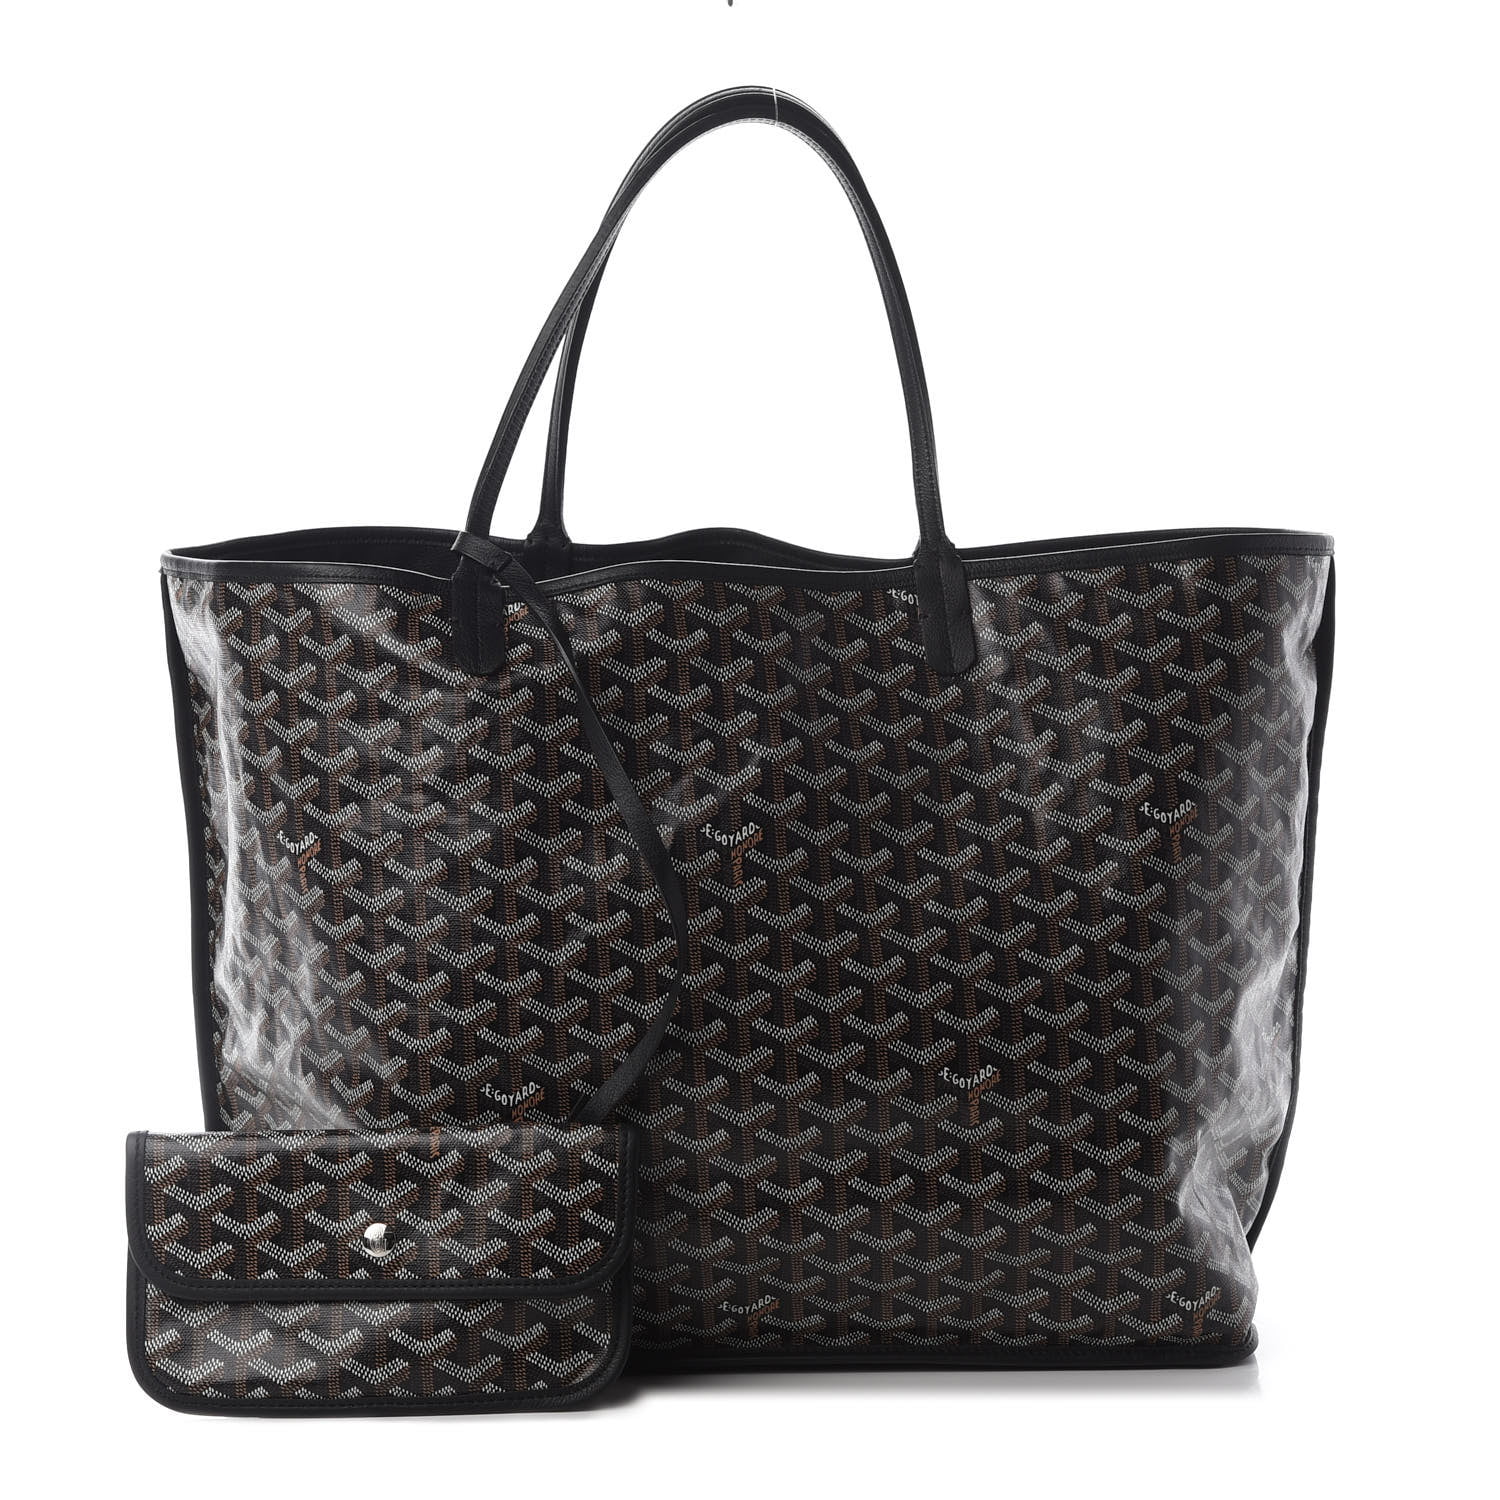 Goyard Bags in Nigeria for sale ▷ Prices on